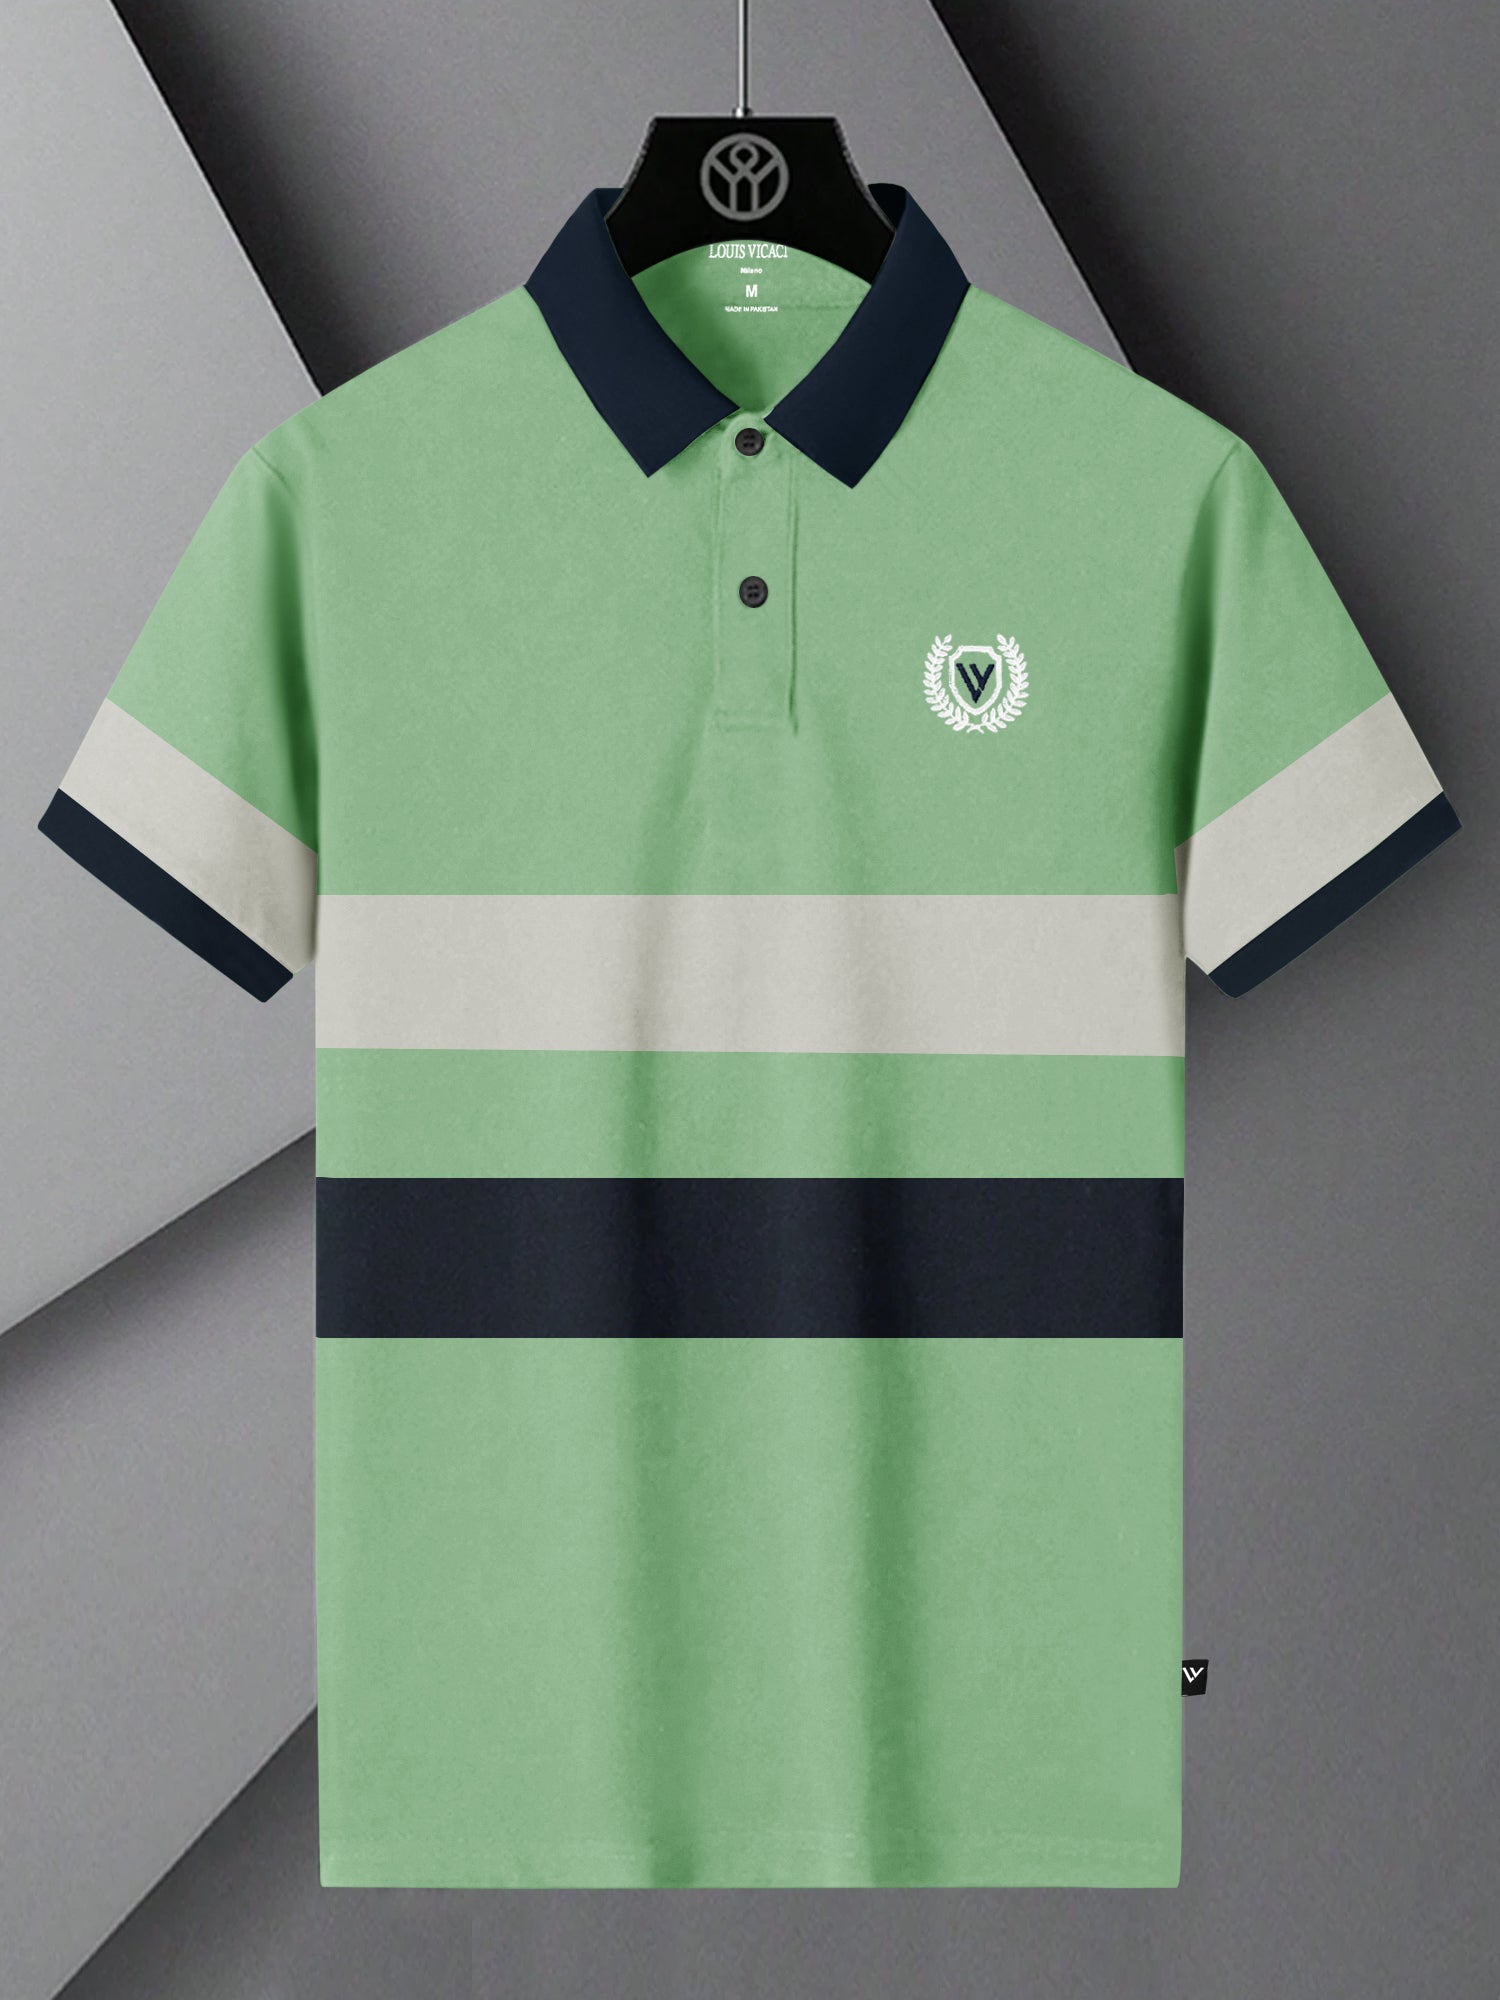 LV Summer Polo Shirt For Men-Parrot Green with Navy-SP1514